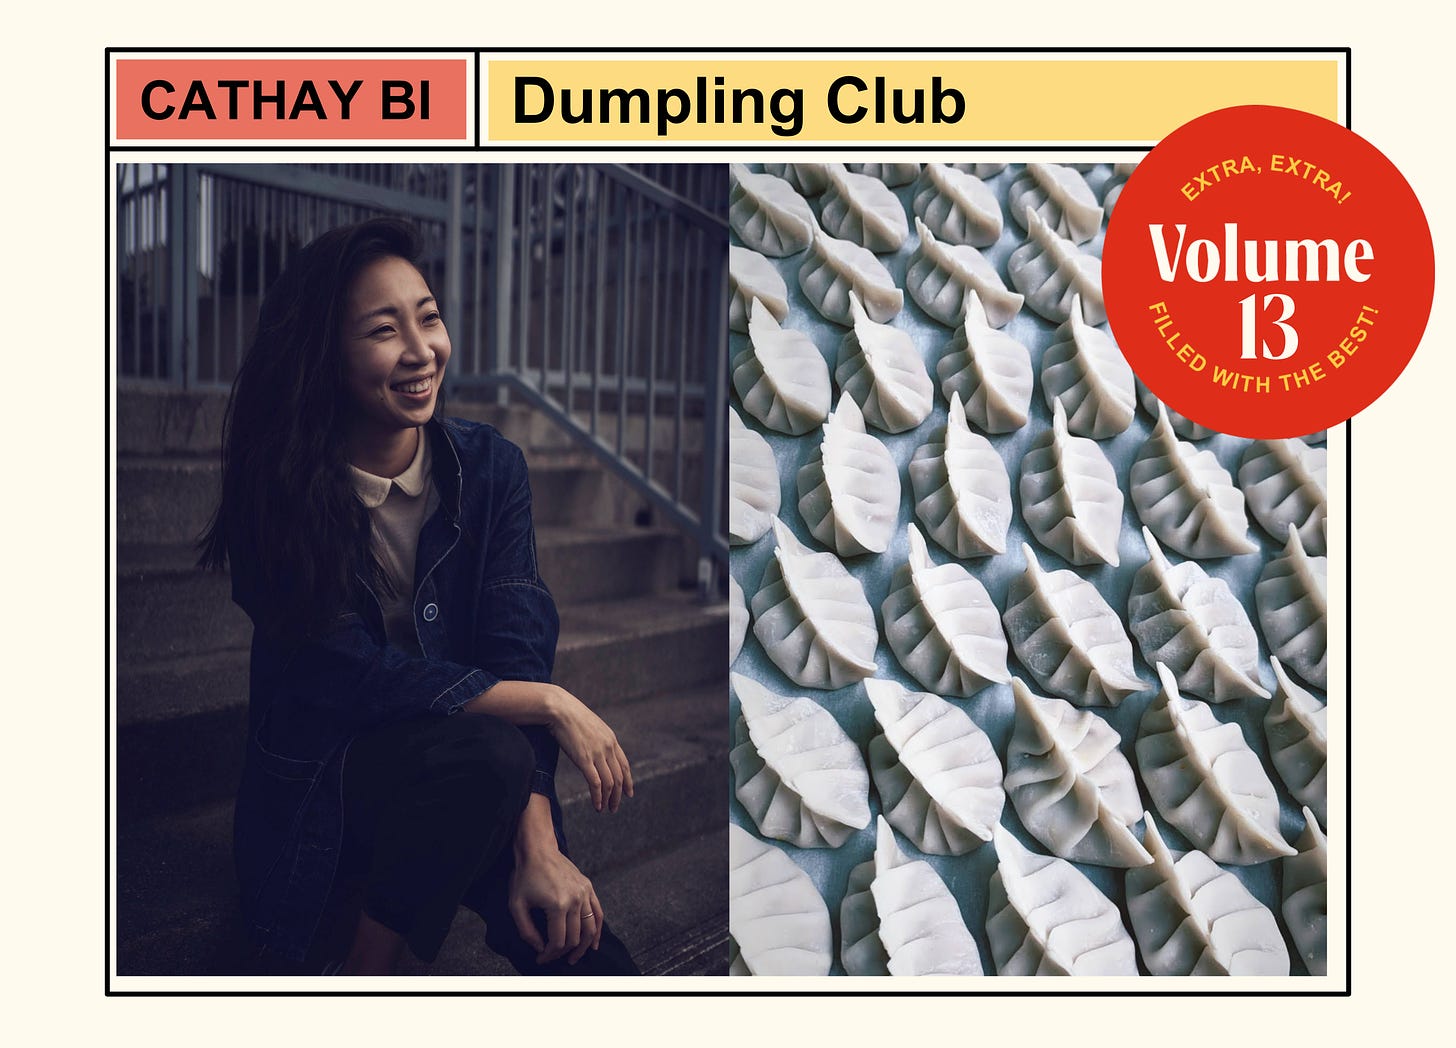 A graphic containing an image of Dumpling Club's Cathay Bi next to a photo of her expertly pleated dumplings